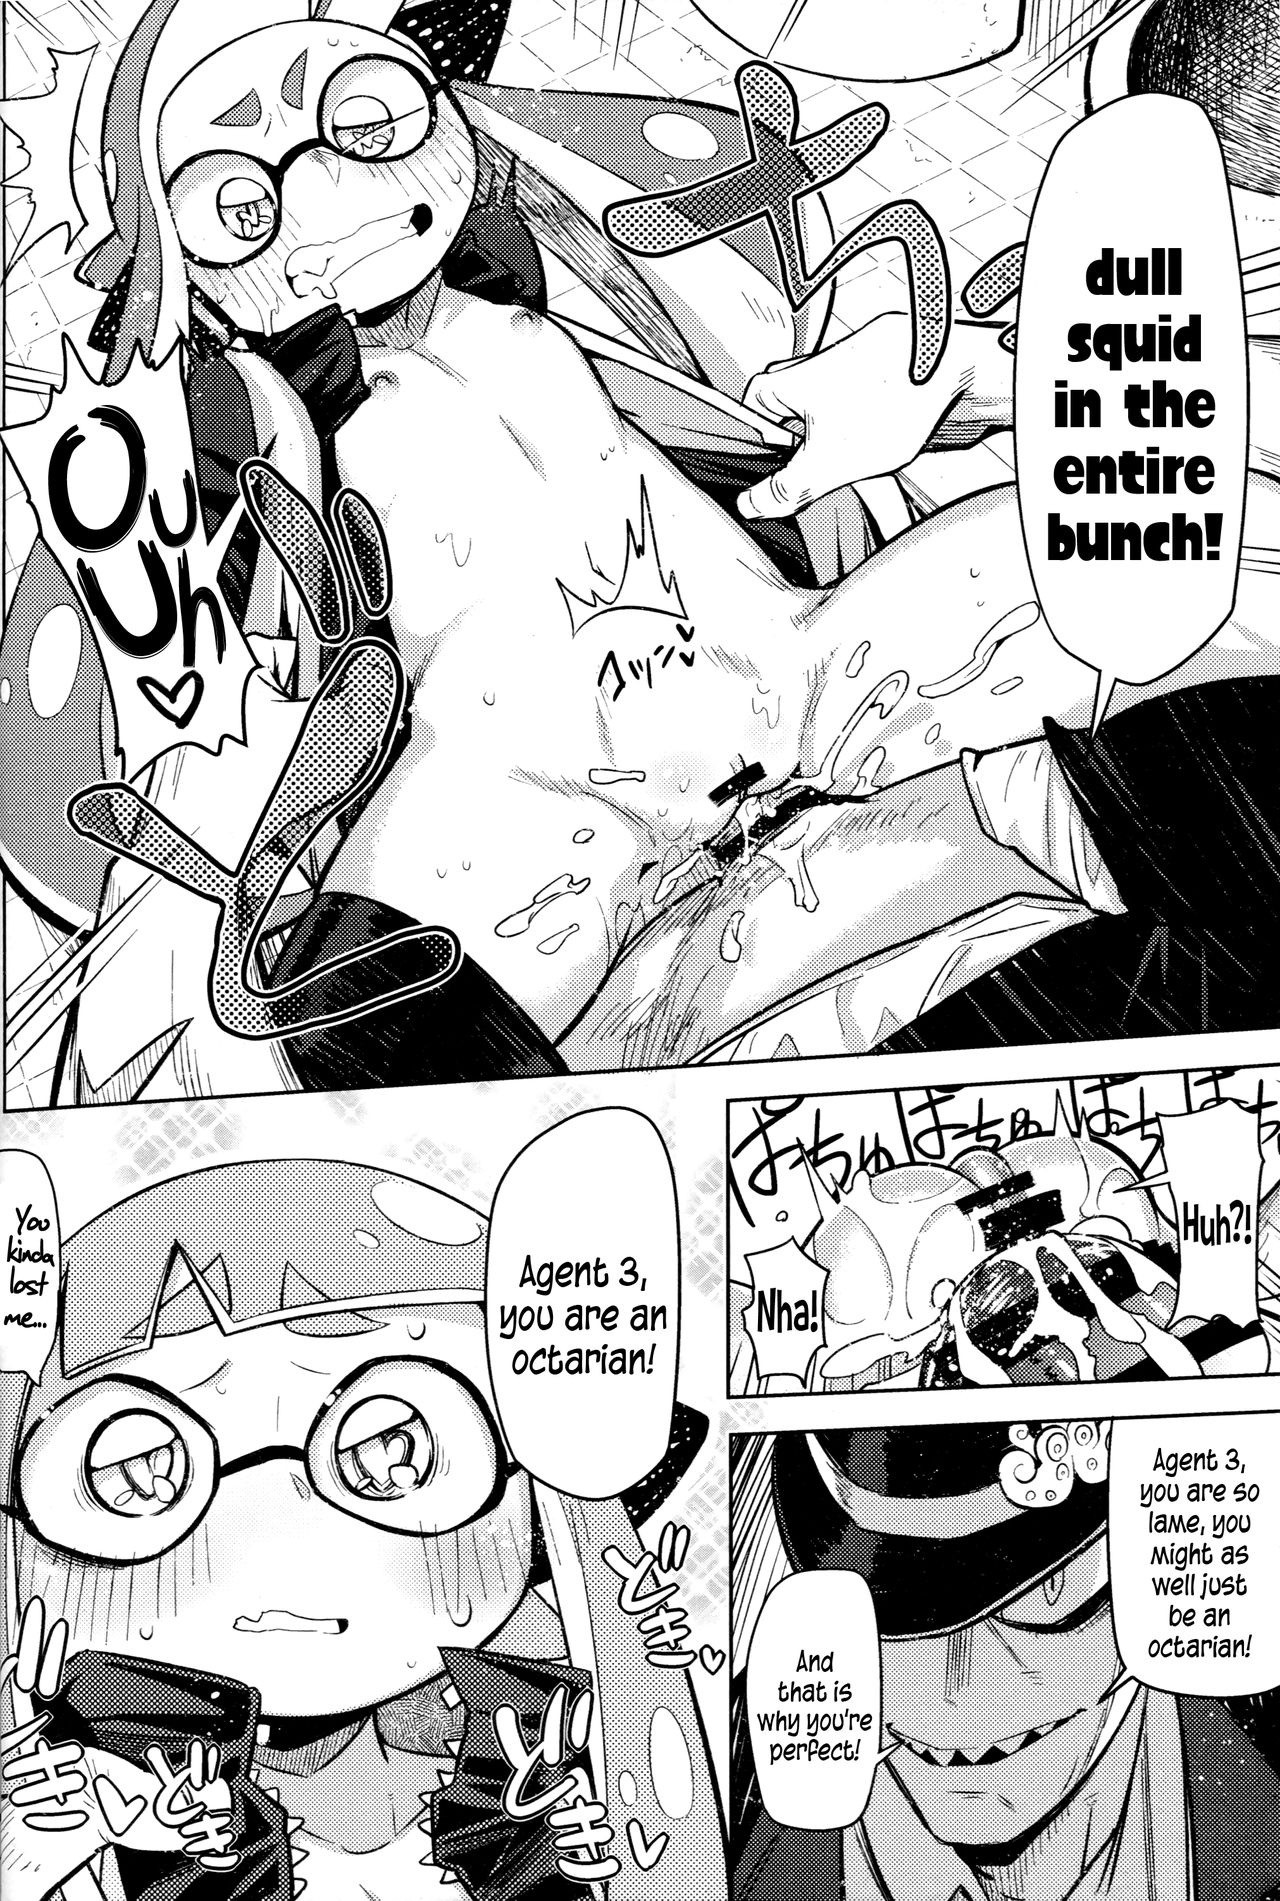 Hero by a Hair's Breadth hentai manga picture 16